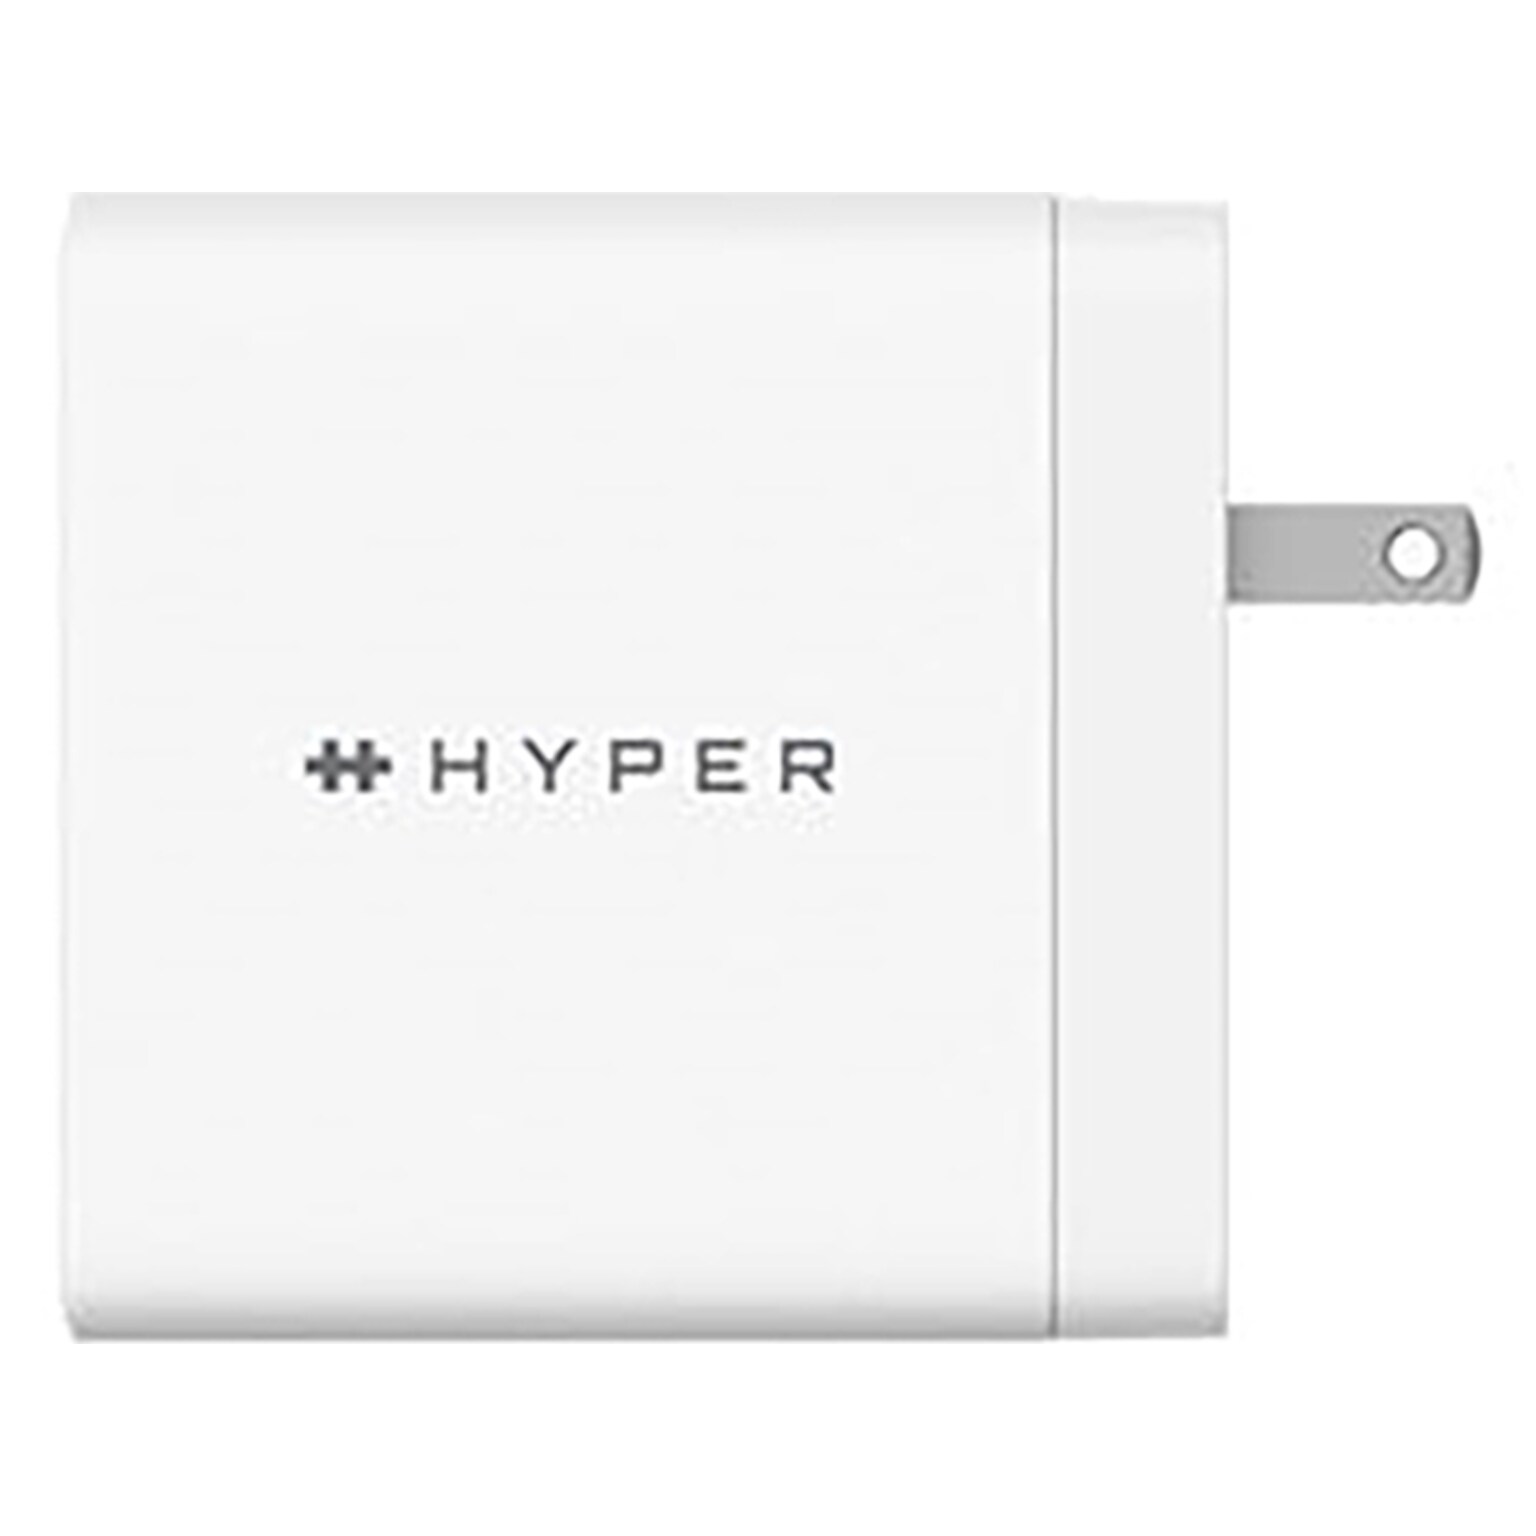 Targus HyperJuice 140W USB Type-C Wall Charger, White (HJG140US)